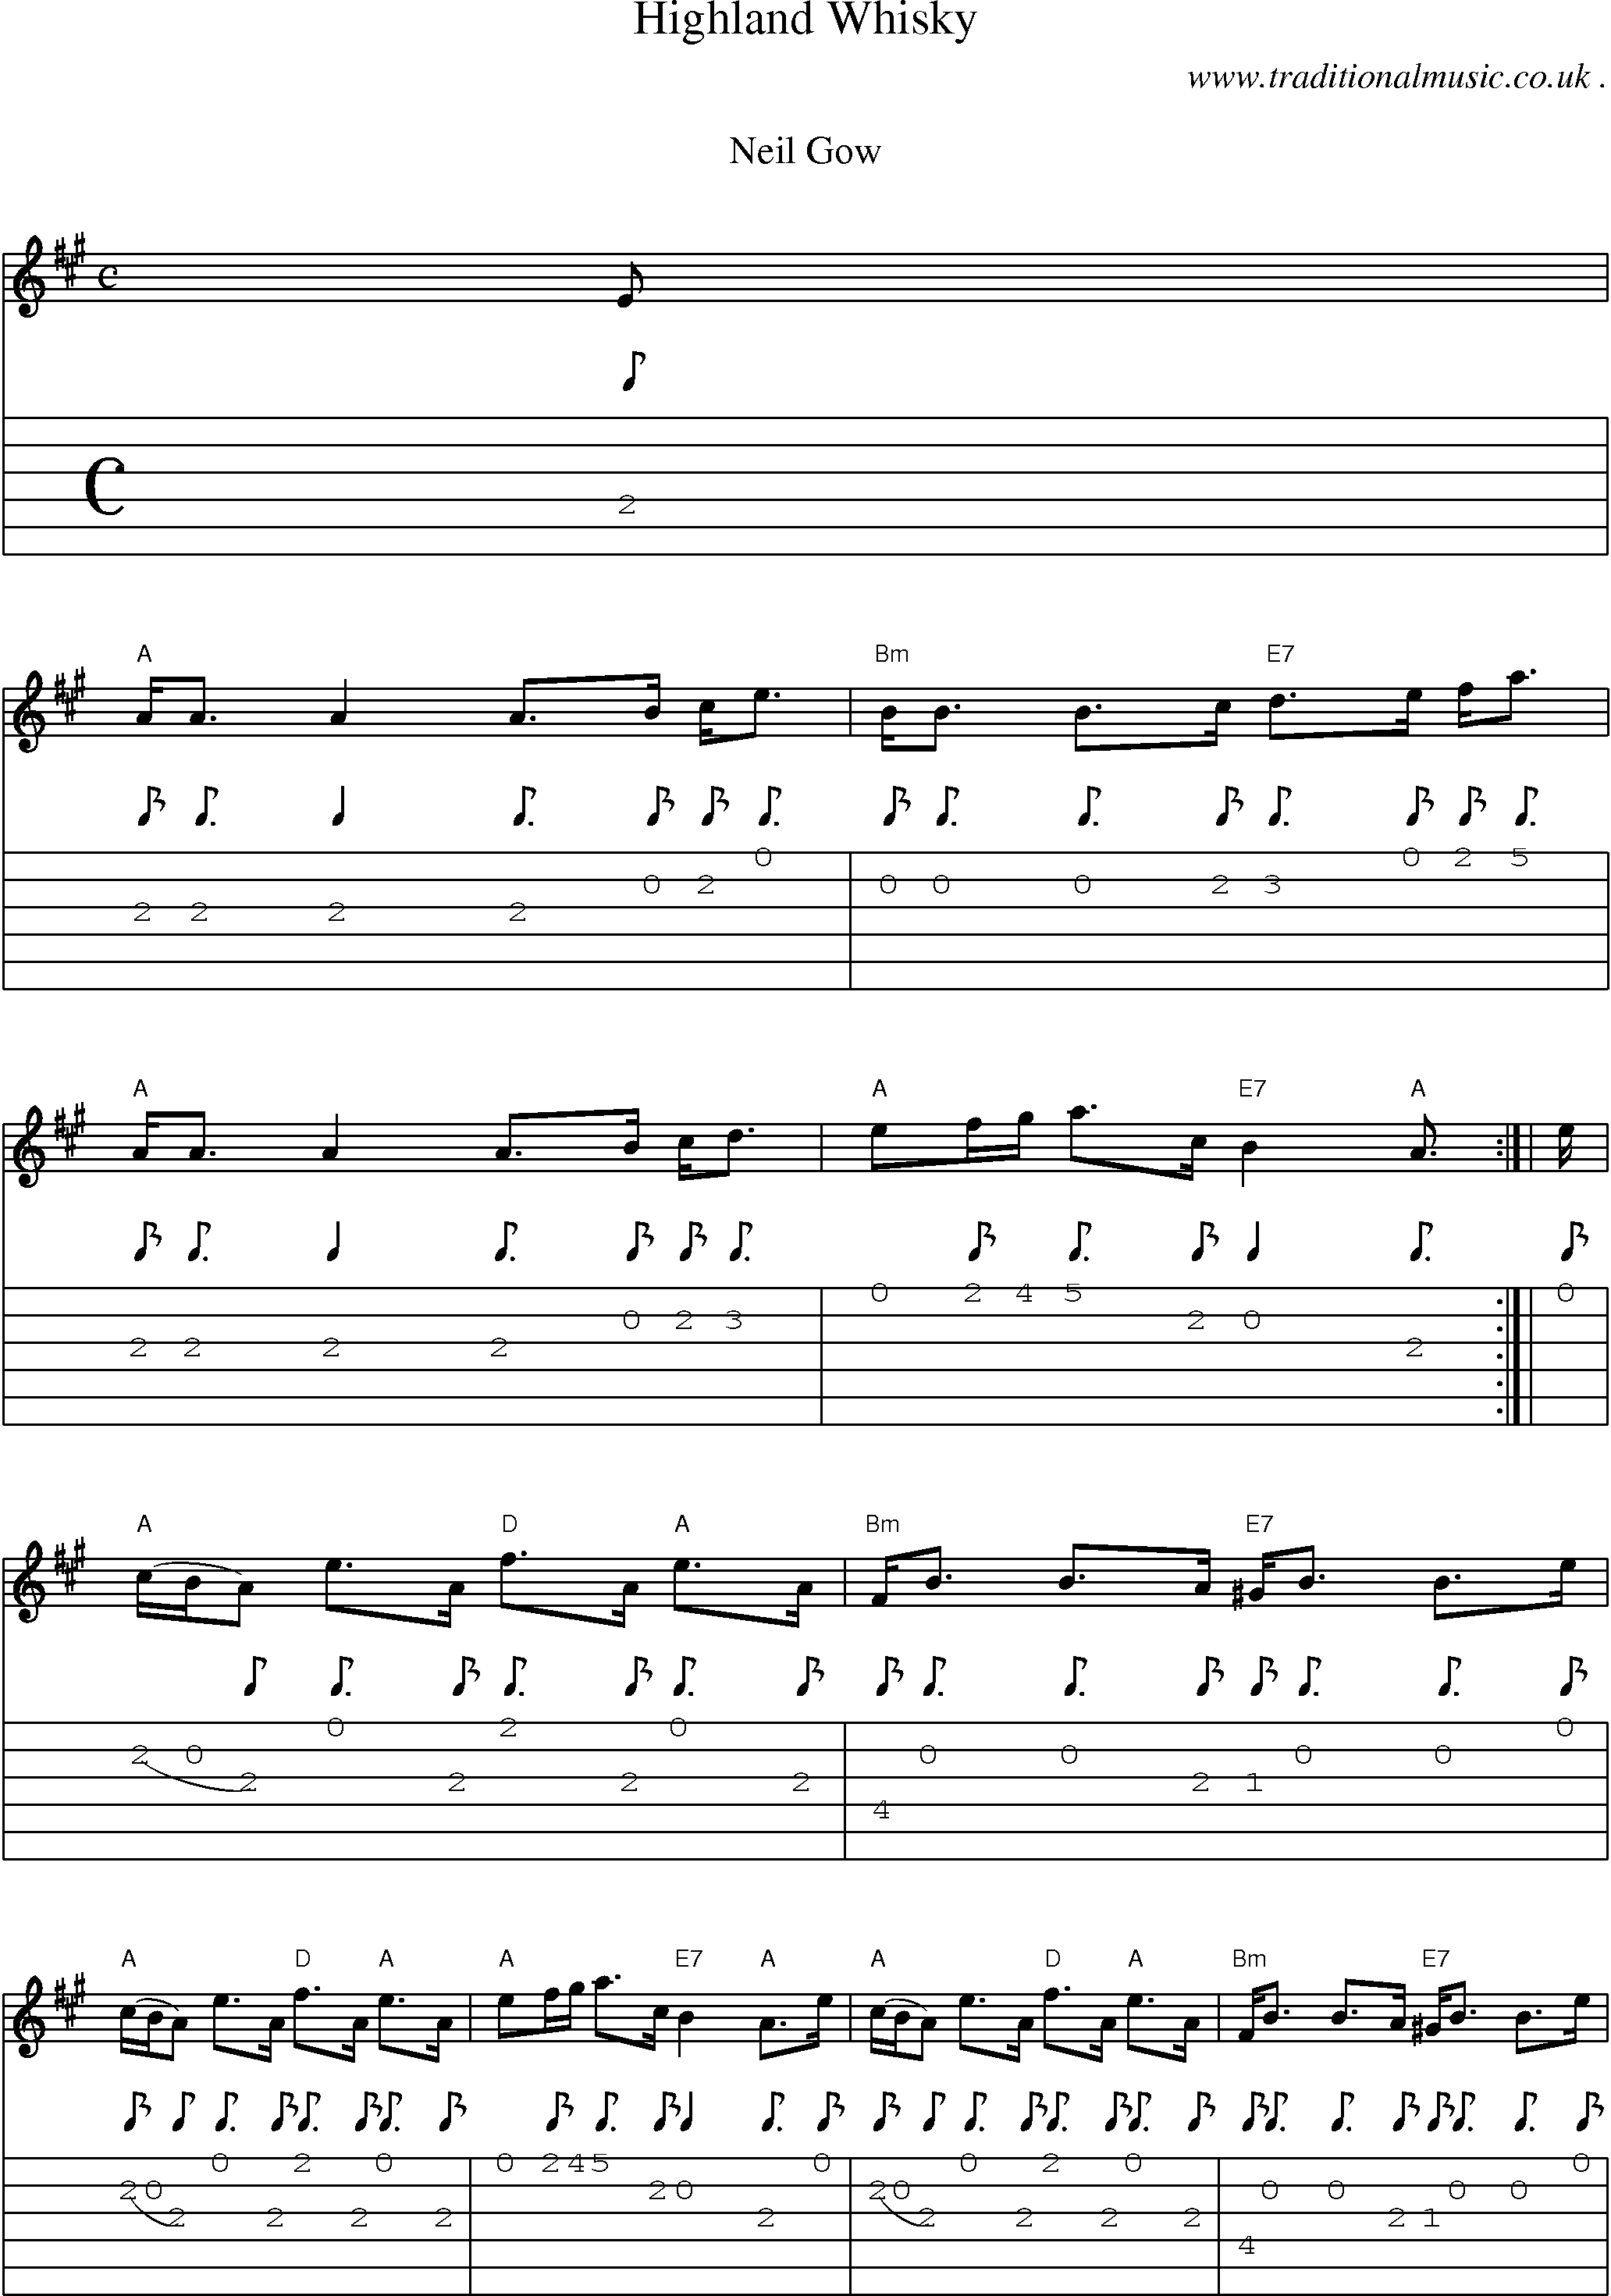 Sheet-music  score, Chords and Guitar Tabs for Highland Whisky